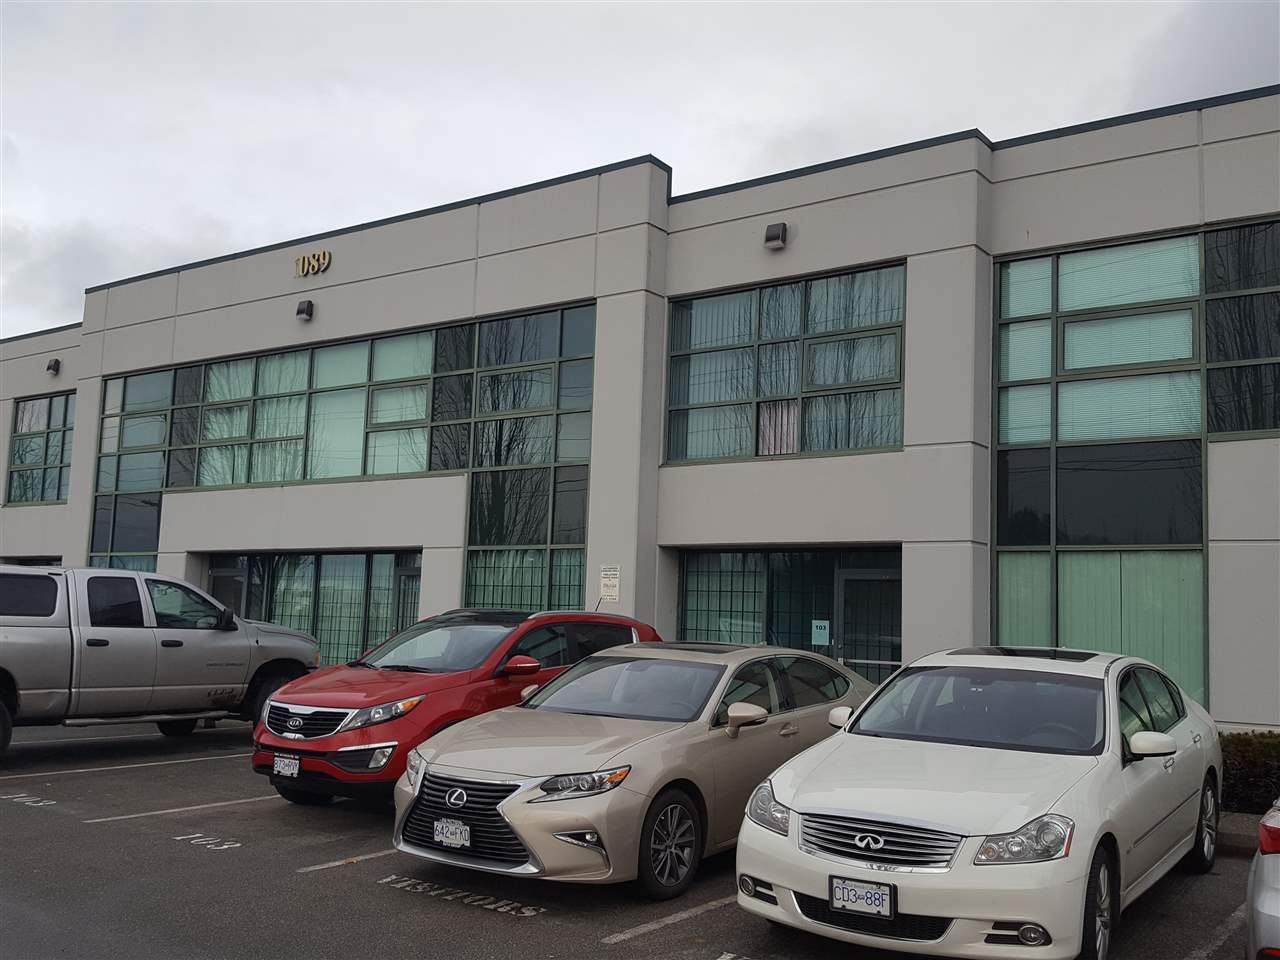 Main Photo: 103 1089 E KENT Avenue in Vancouver: South Vancouver Industrial for lease (Vancouver East)  : MLS®# C8009580